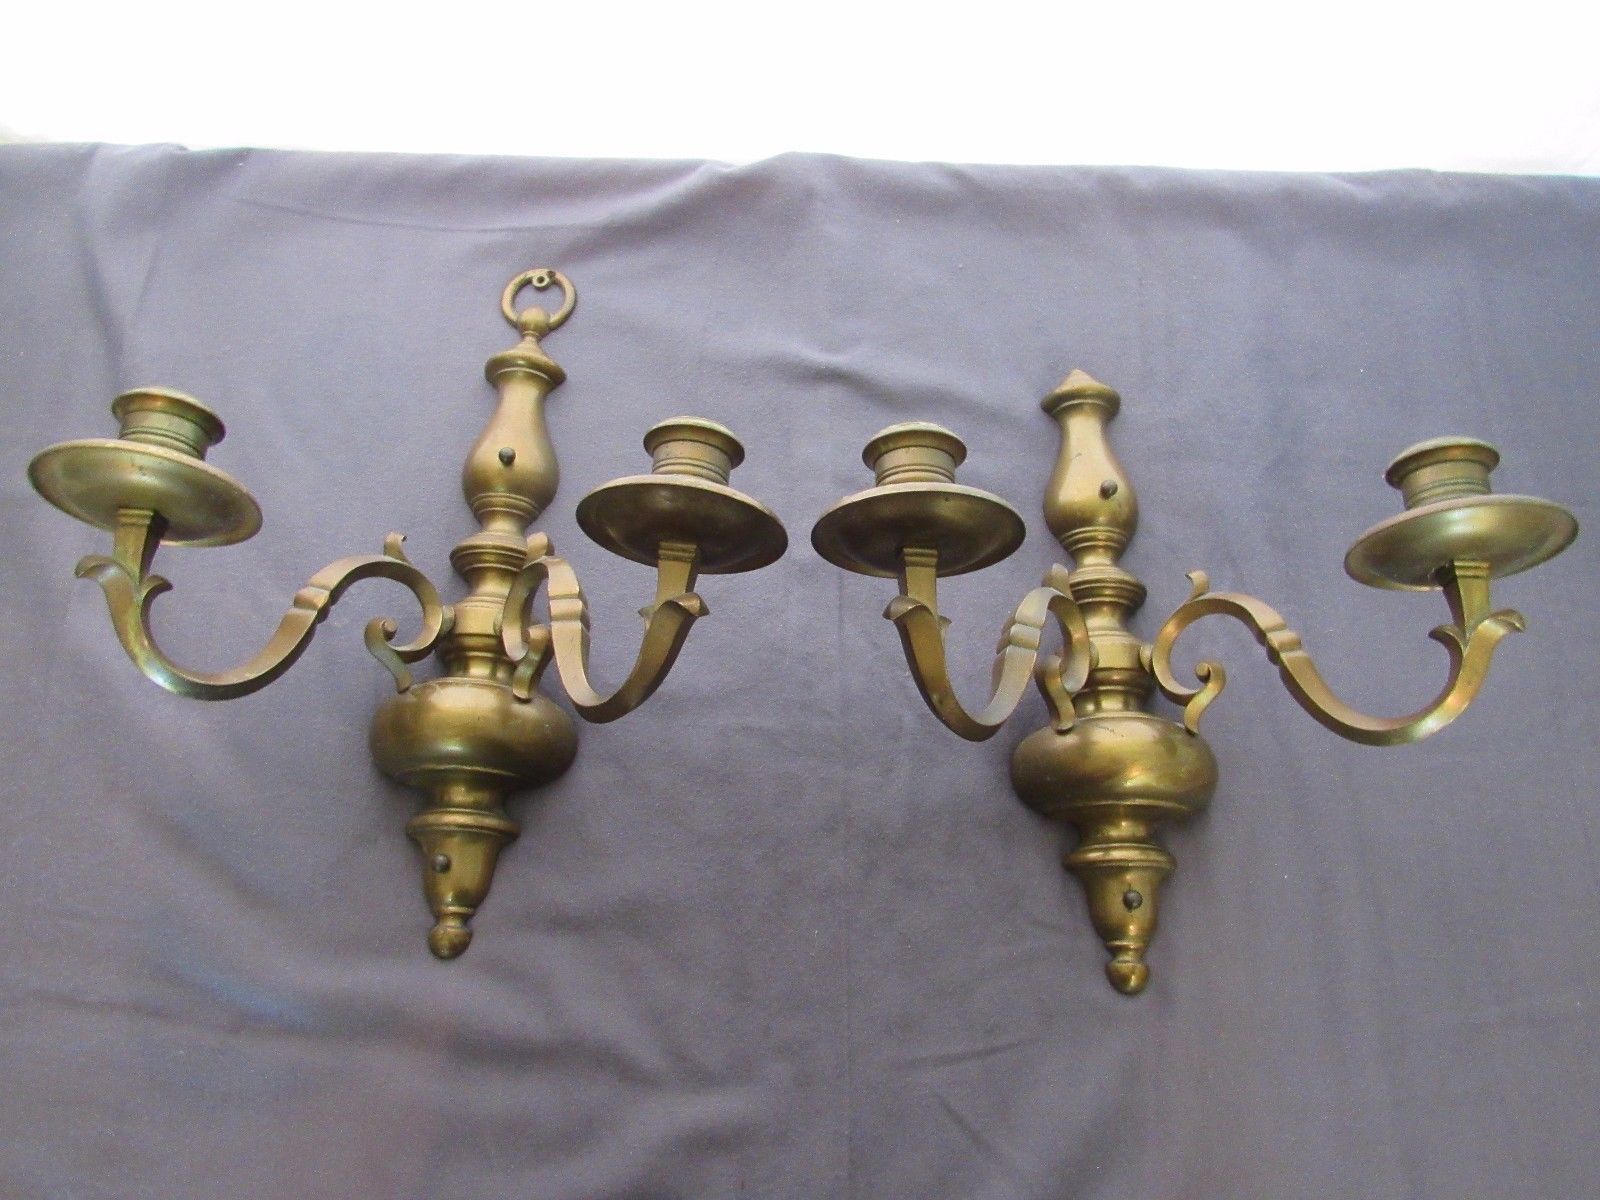 Vintage solid brass wall sconce candleholder pair